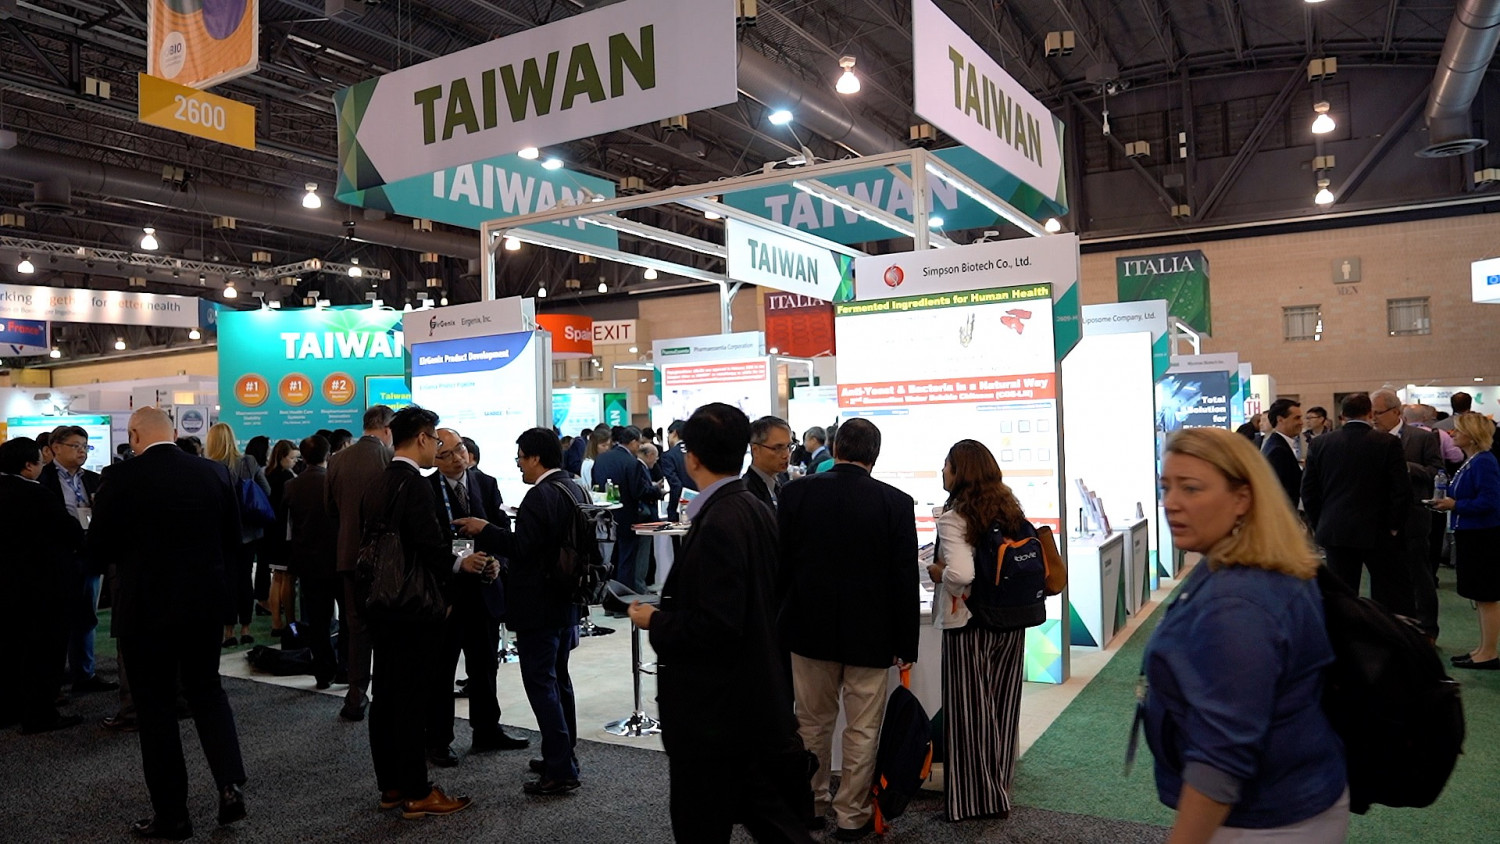 Taiwan Presents Its Wares at World’s Largest Annual Biotech Event